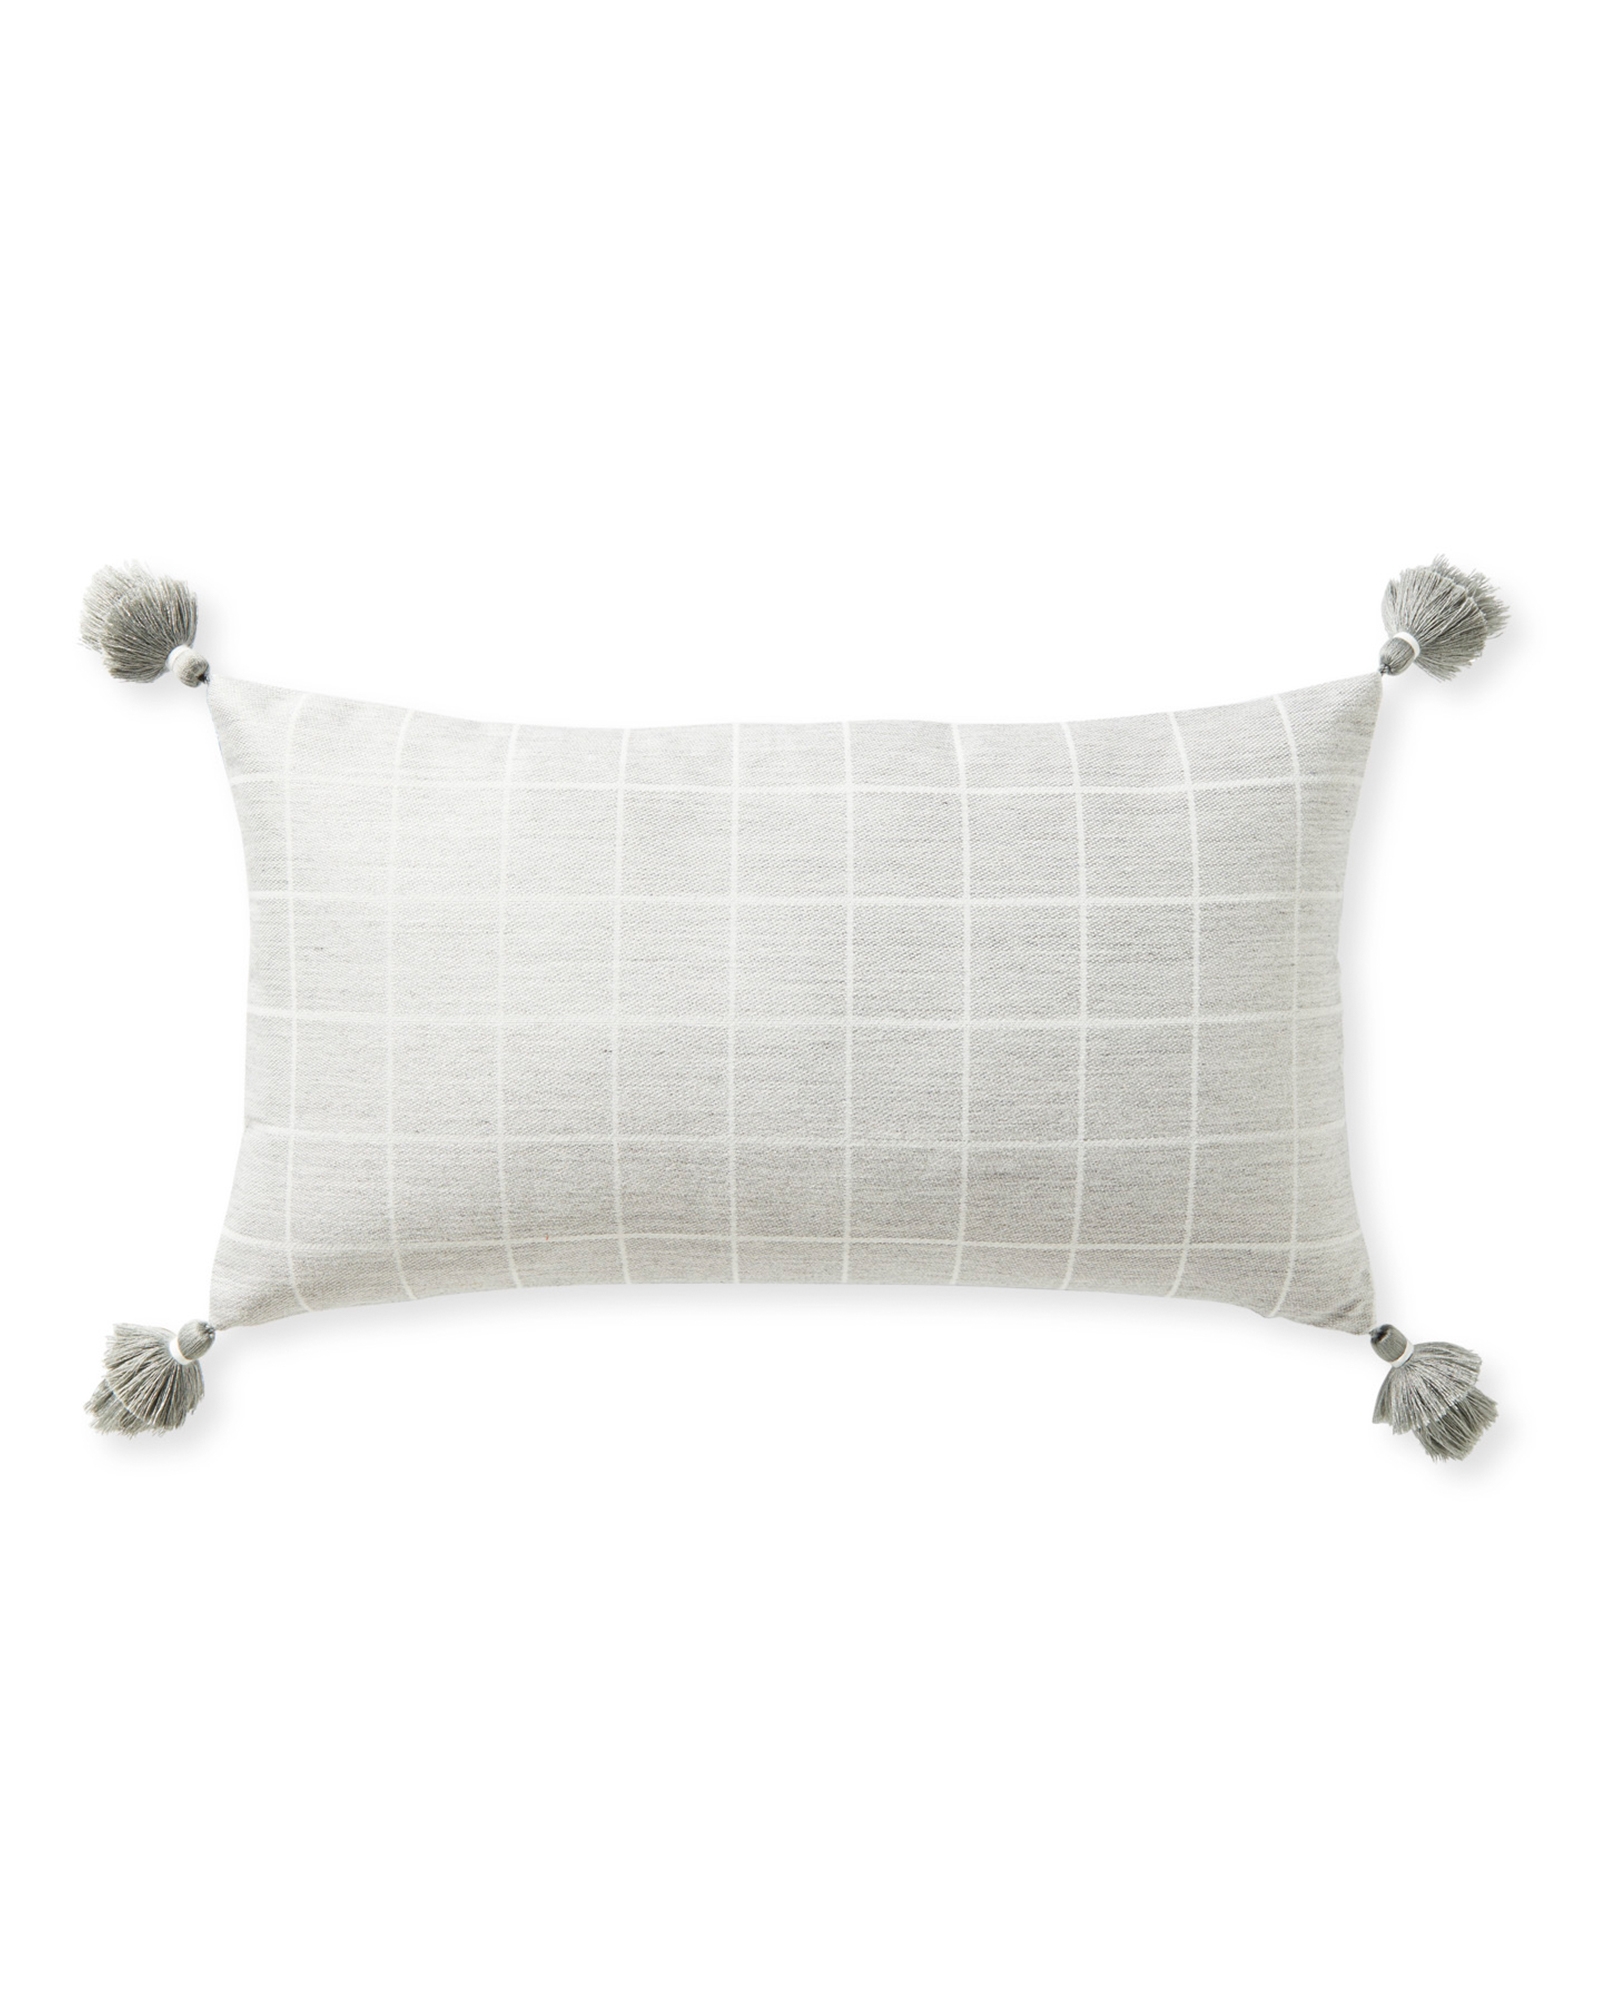 Mayne Pillow Cover, 12x21 - Image 0